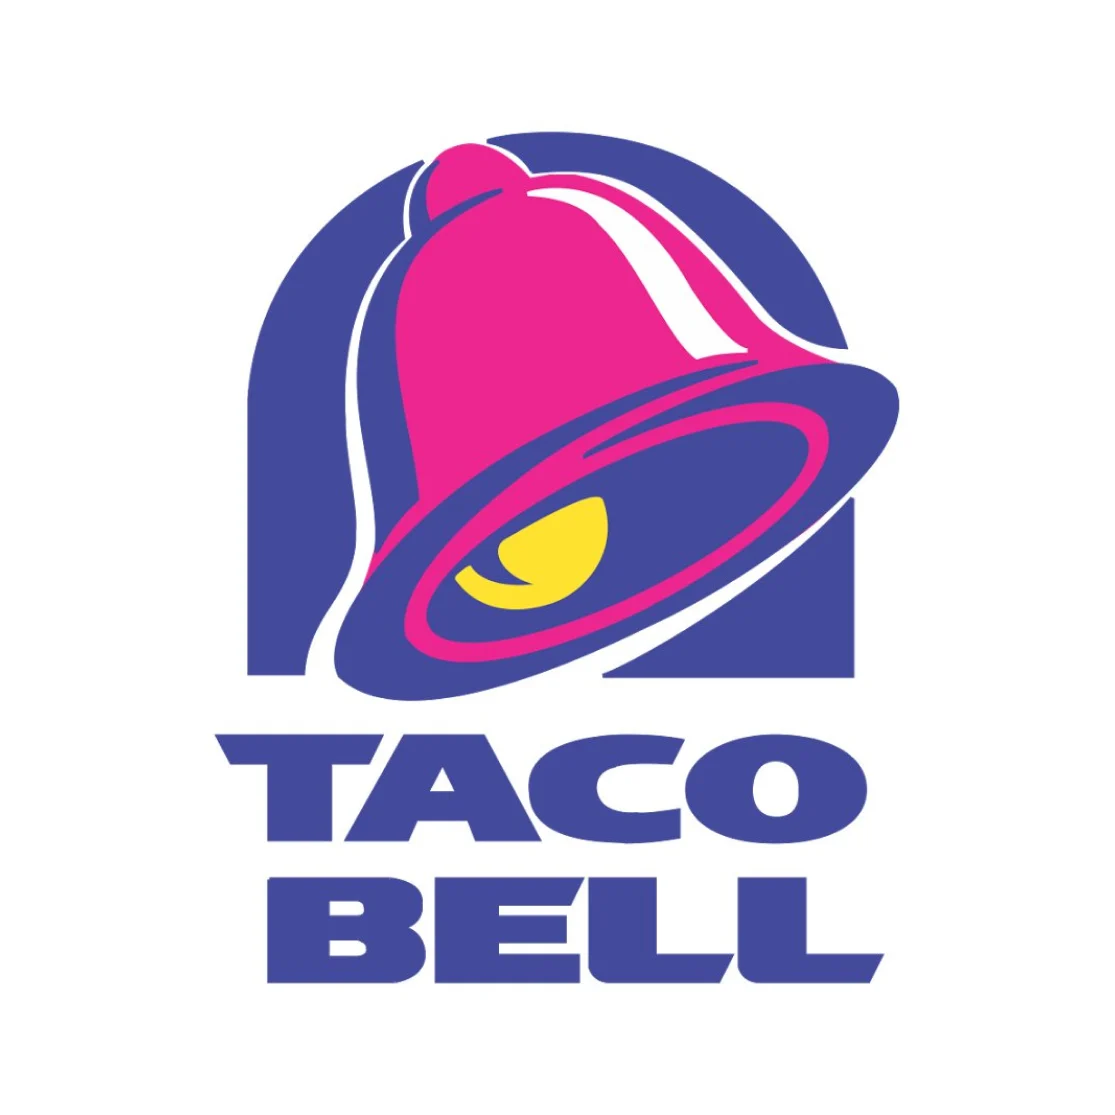 Tacobell.Com Offers An Up To 20% Discount! Hurry Up As It Won'T Last!